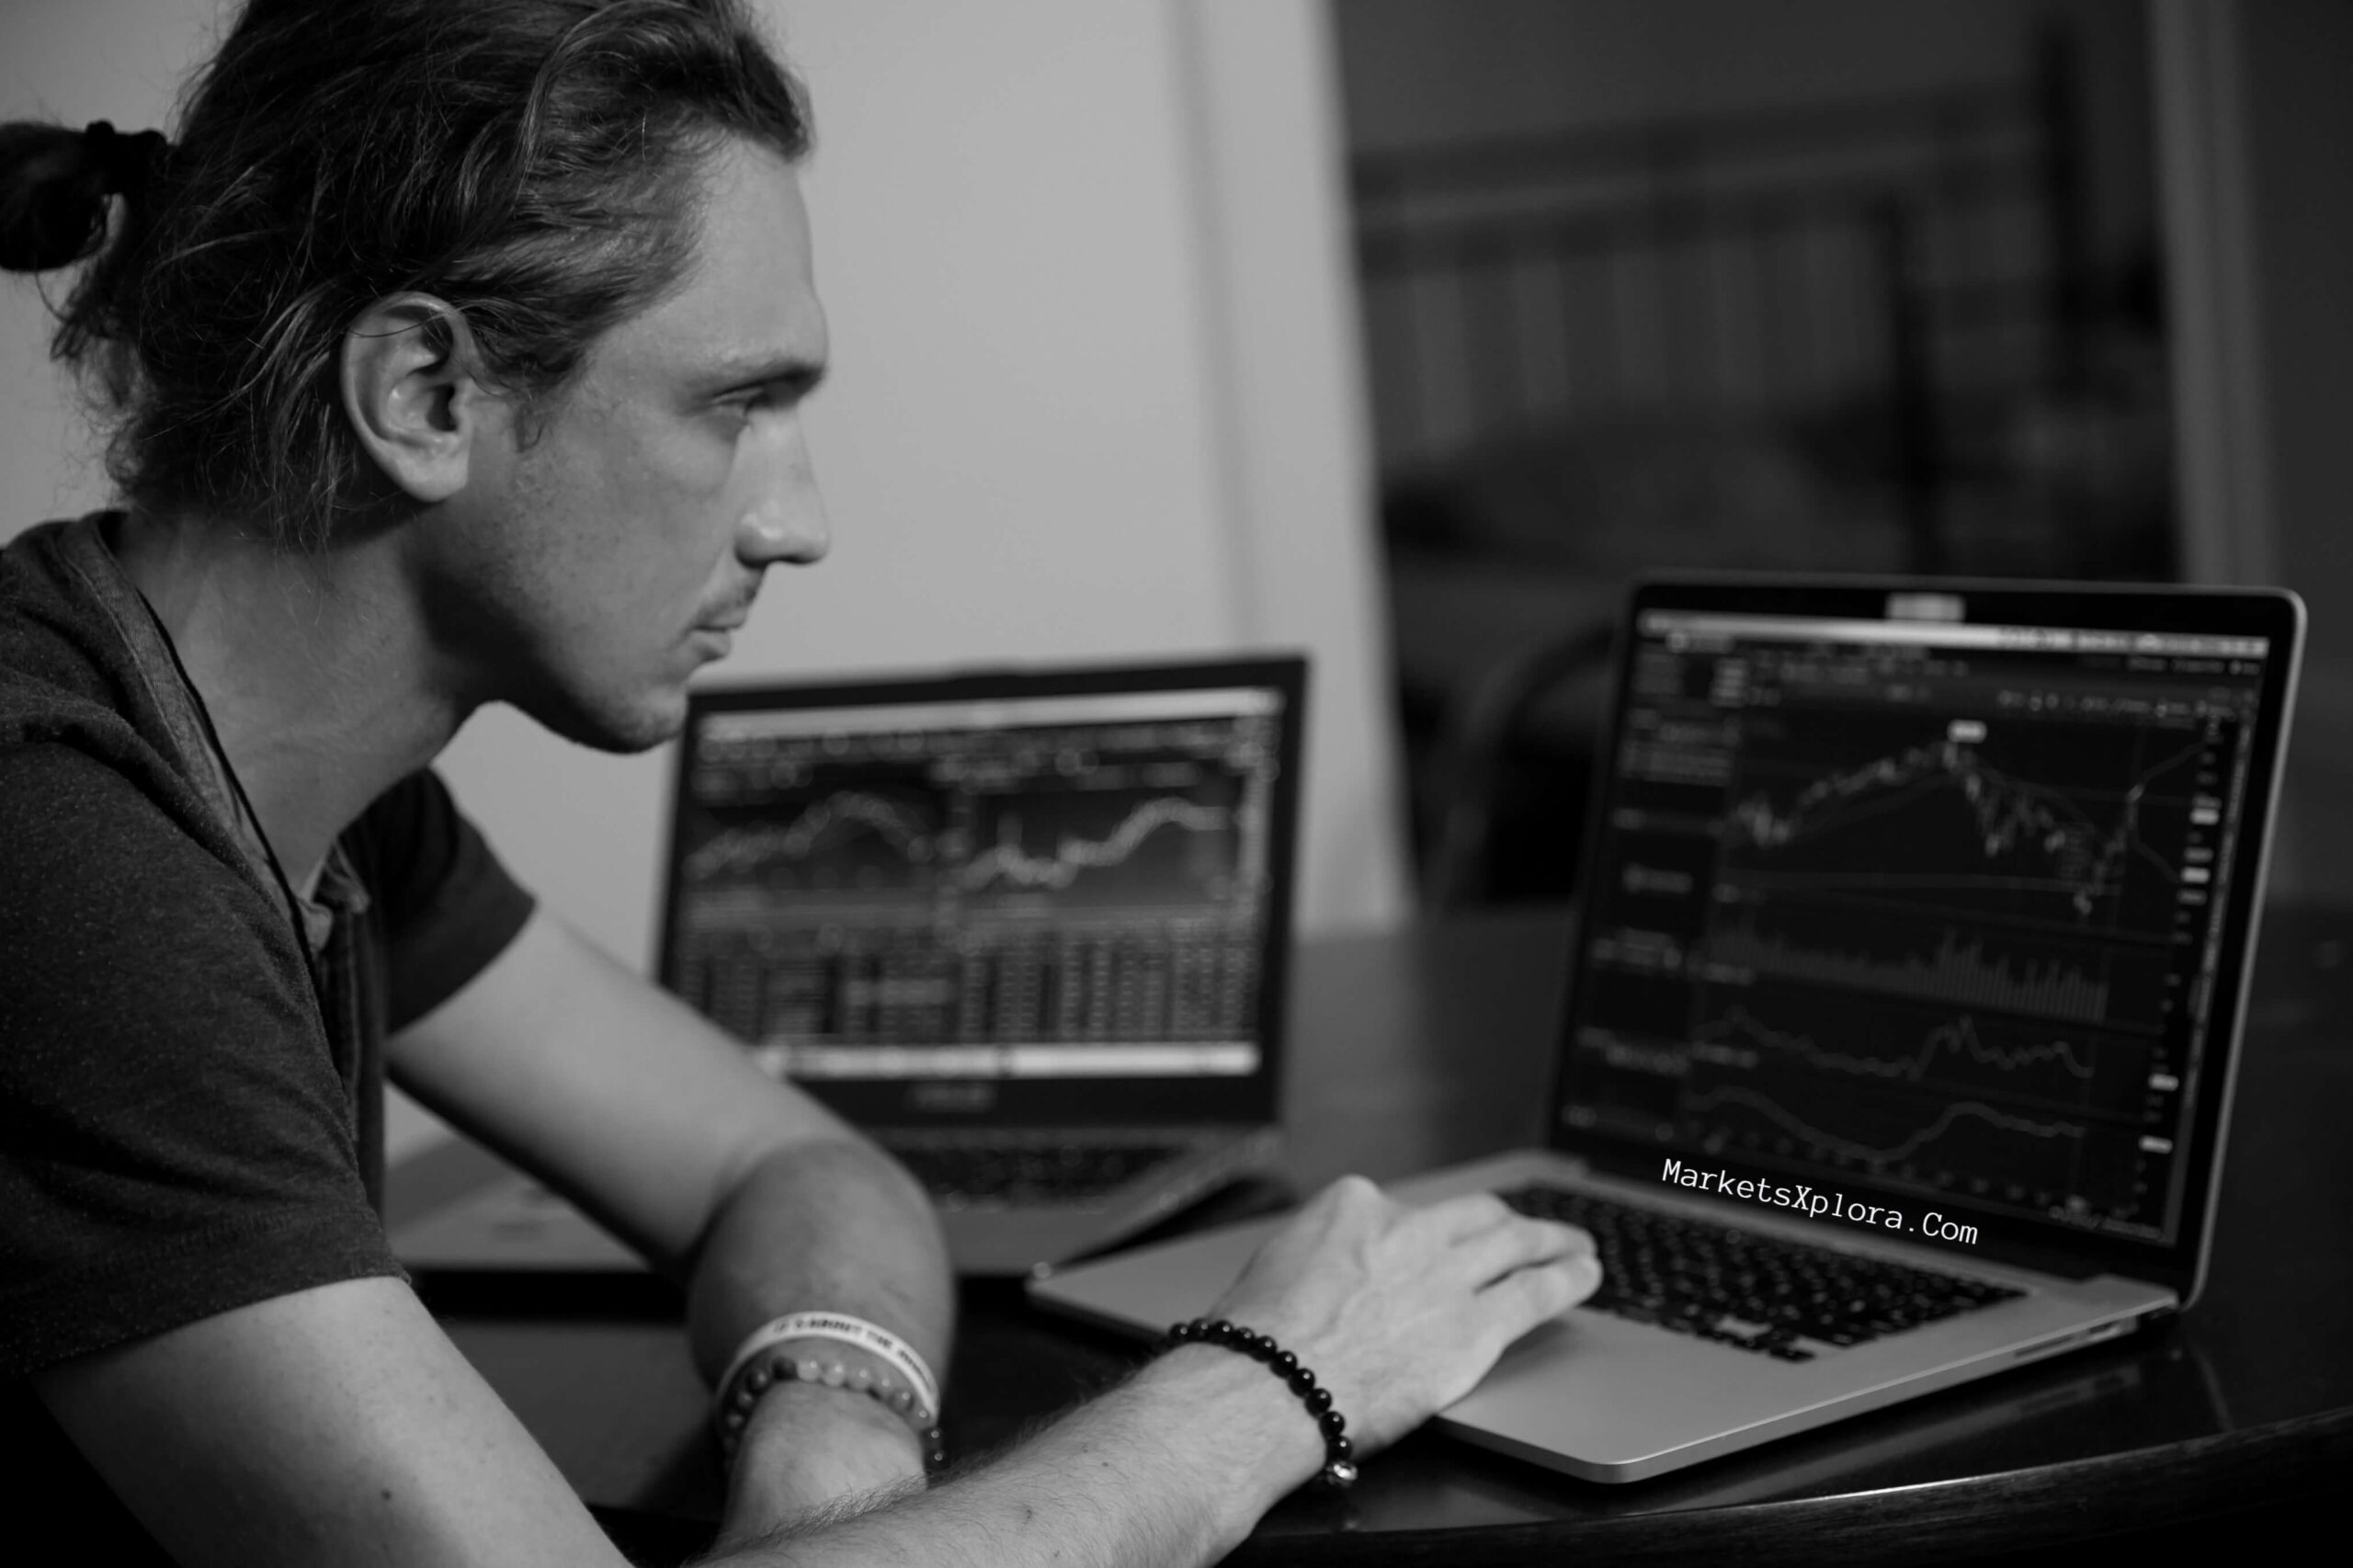 this article gives 7 tips for beginner traders to help them understand "what makes a Forex trader successful.